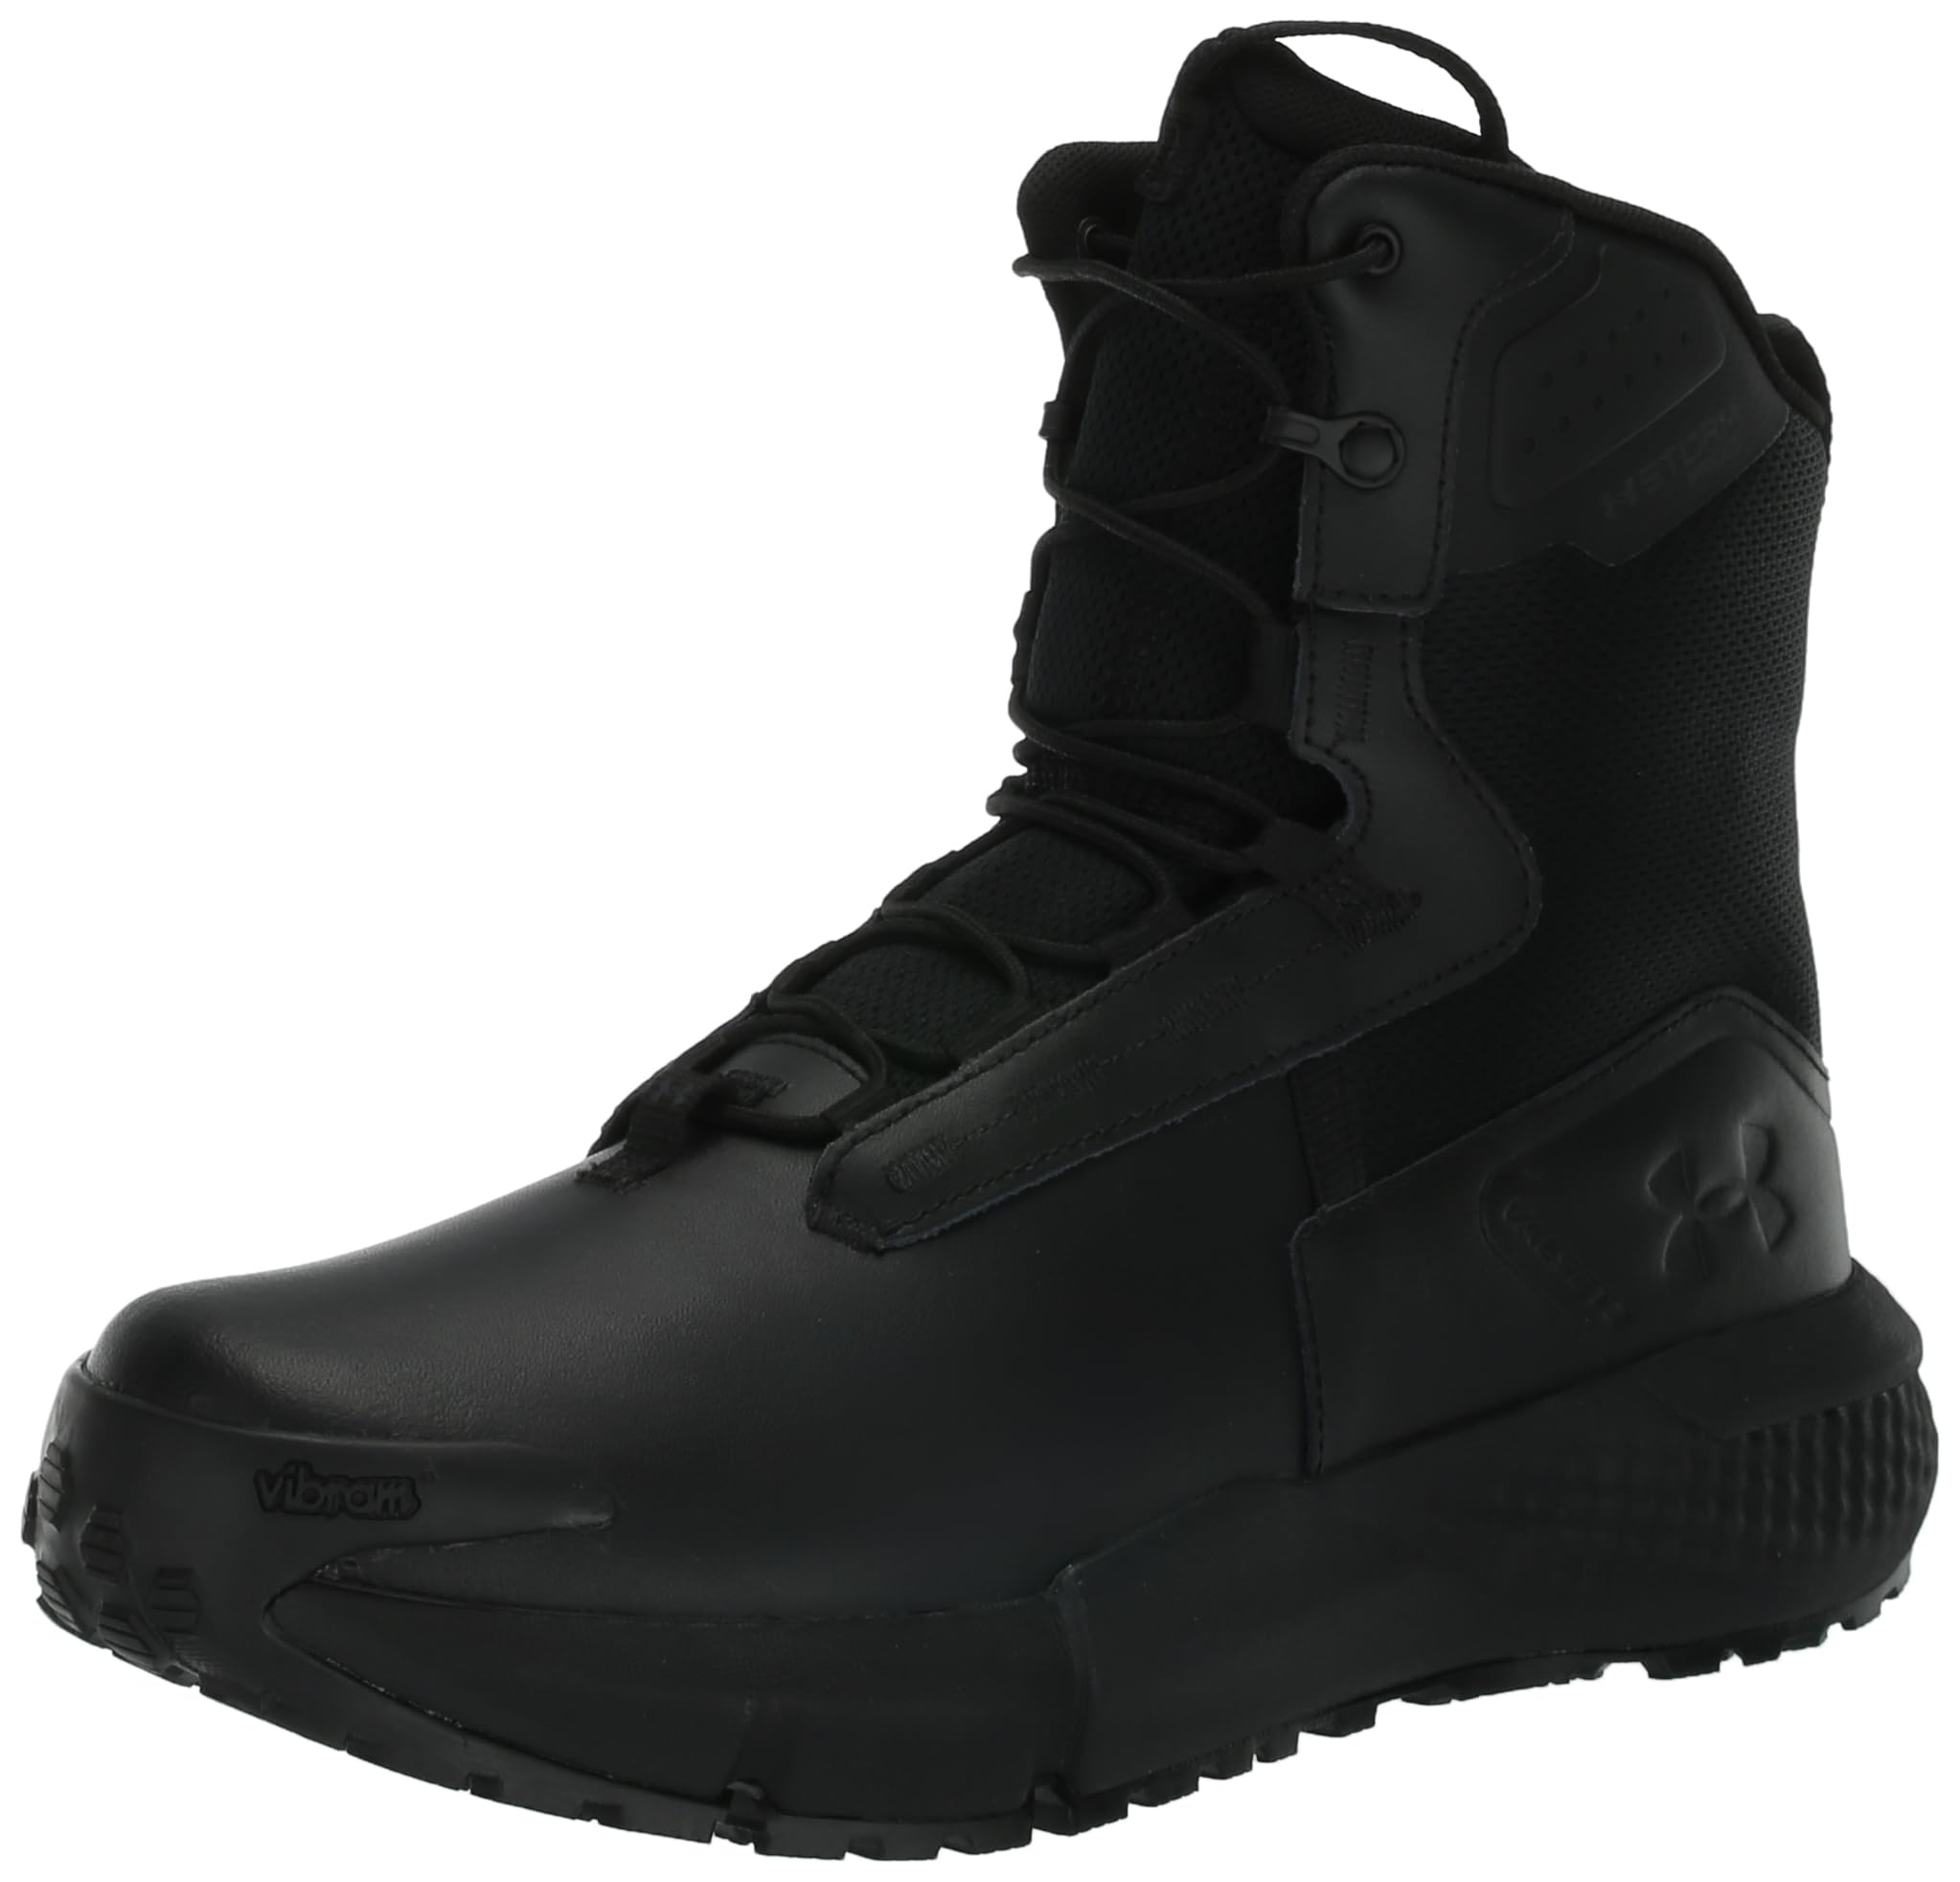 Under Armour Men's Charged Valsetz Zip Waterproof Military and Tactical Boot